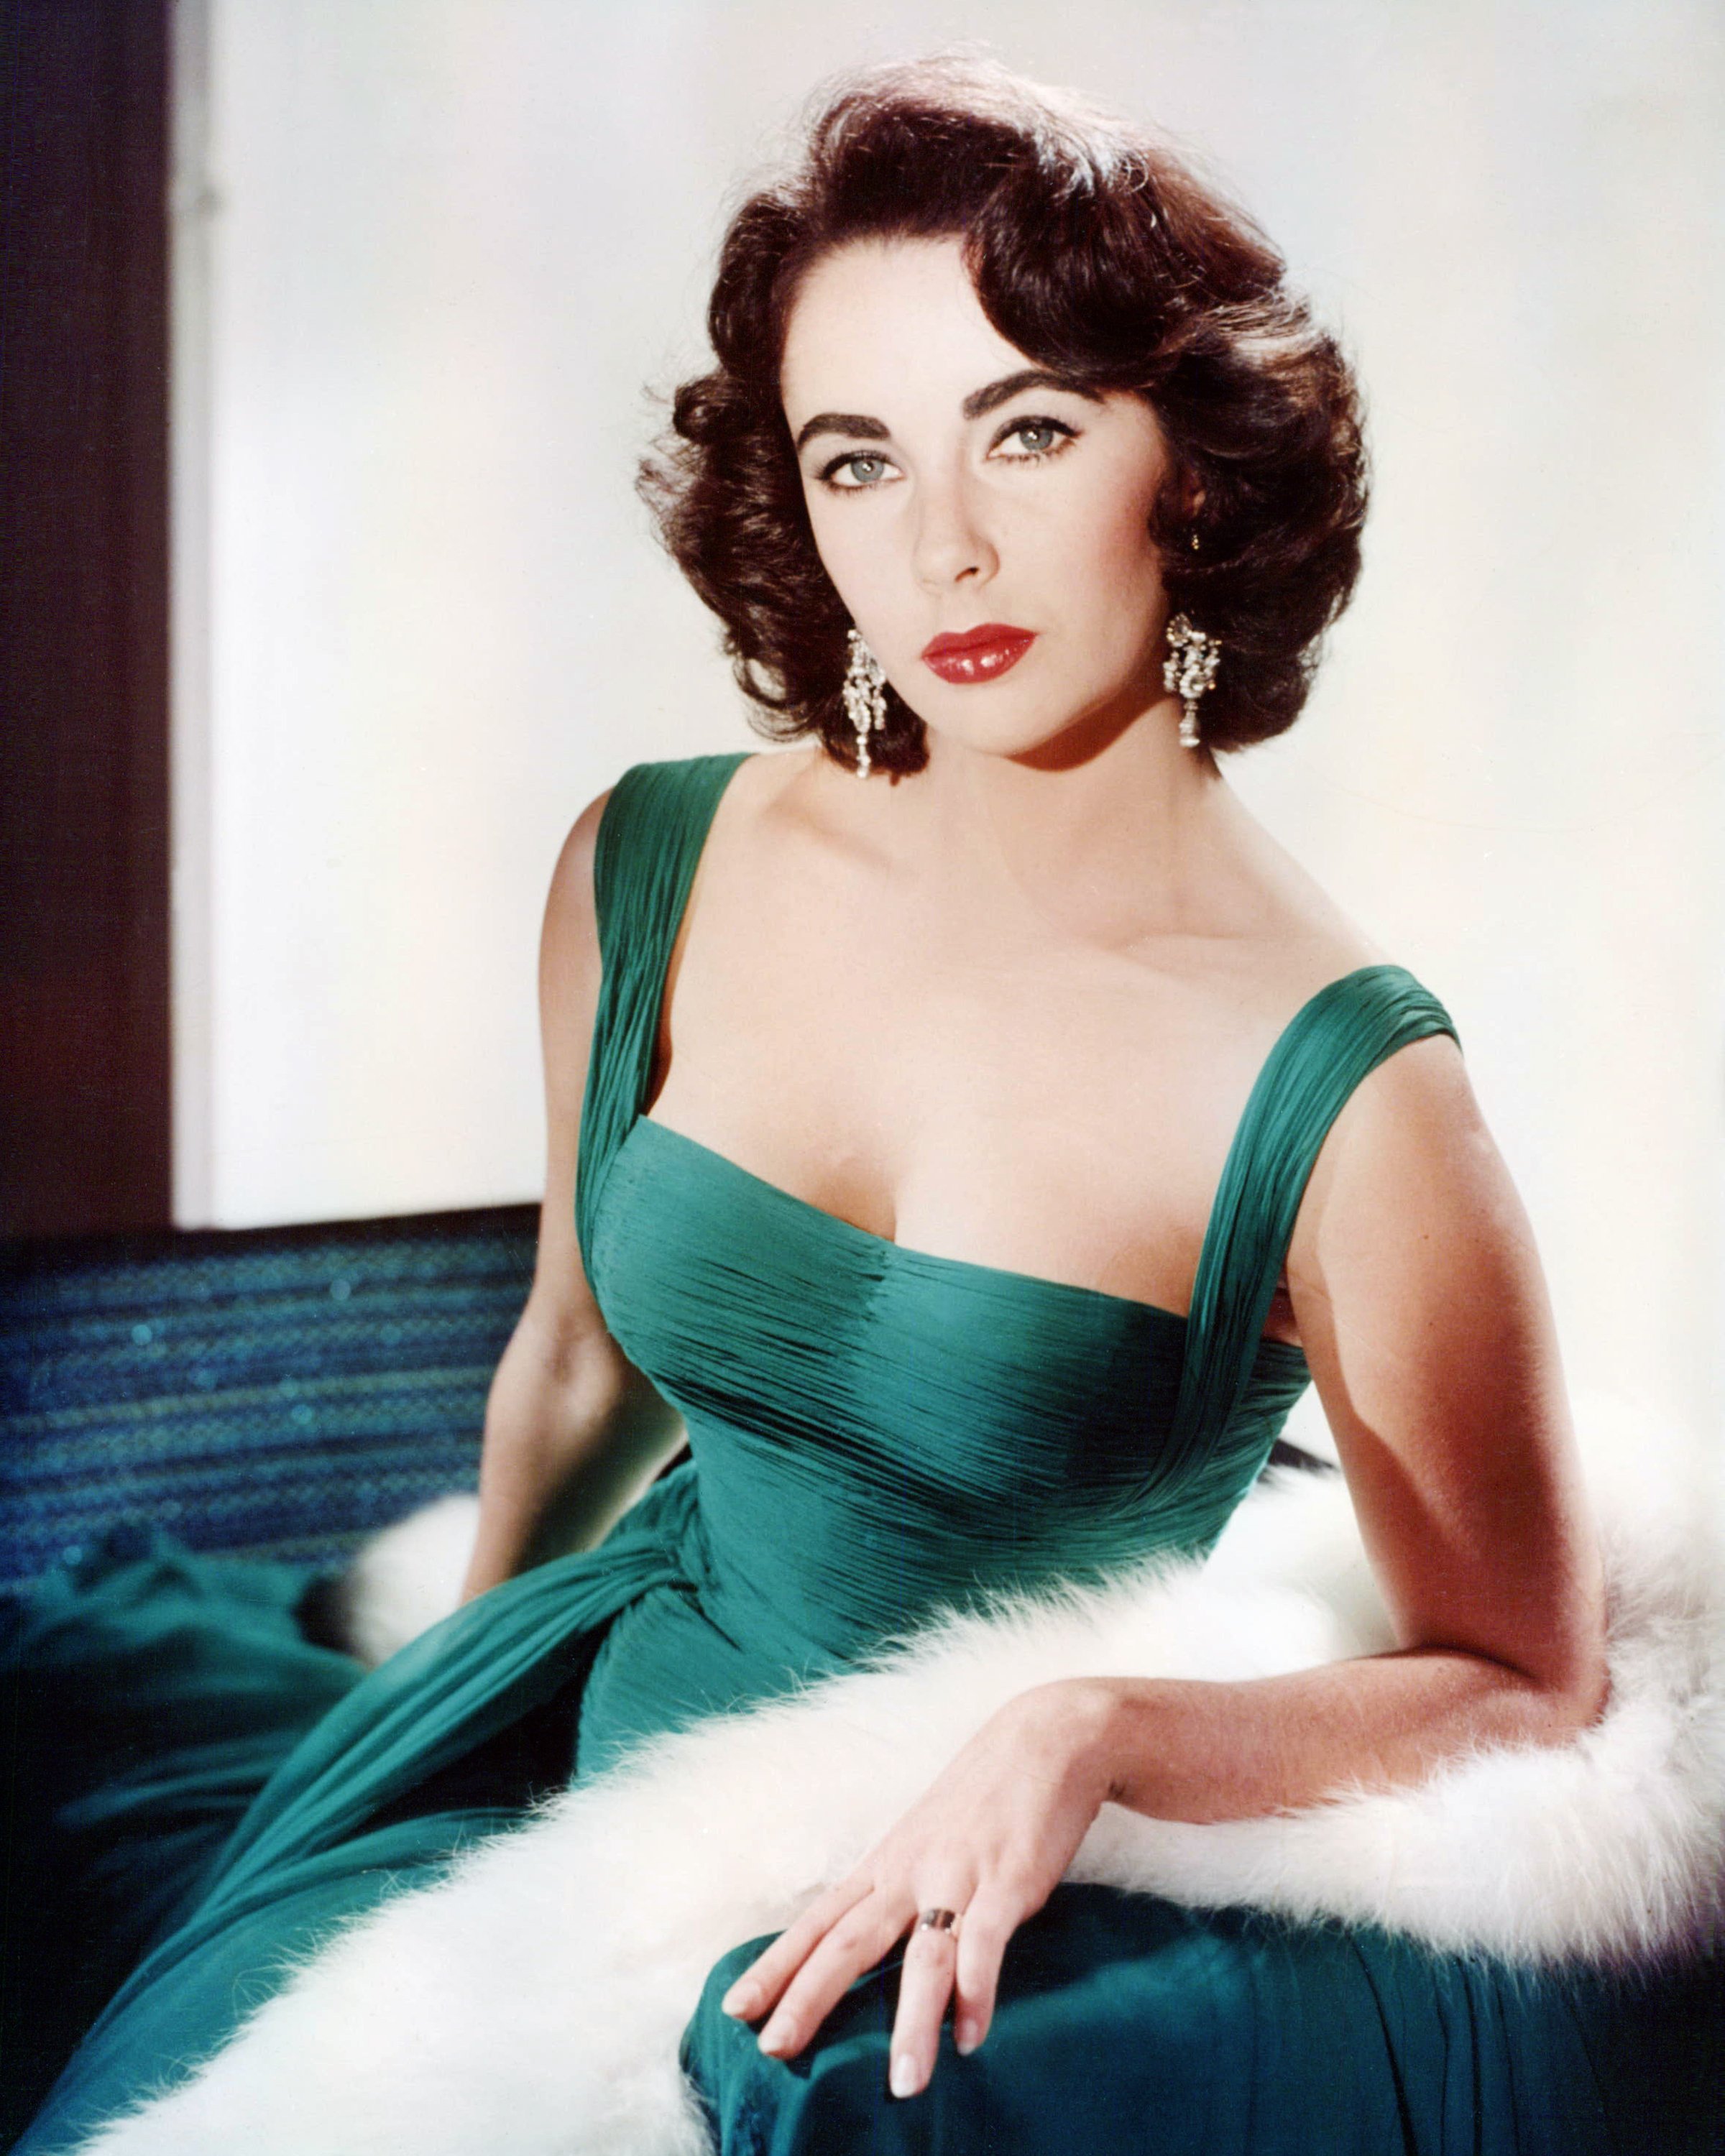  British actress, wearing a green sleeveless low-cut dress, with a white fur wrap on the arm of the armchair in which she sits, circa 1950. | Source: Getty Images